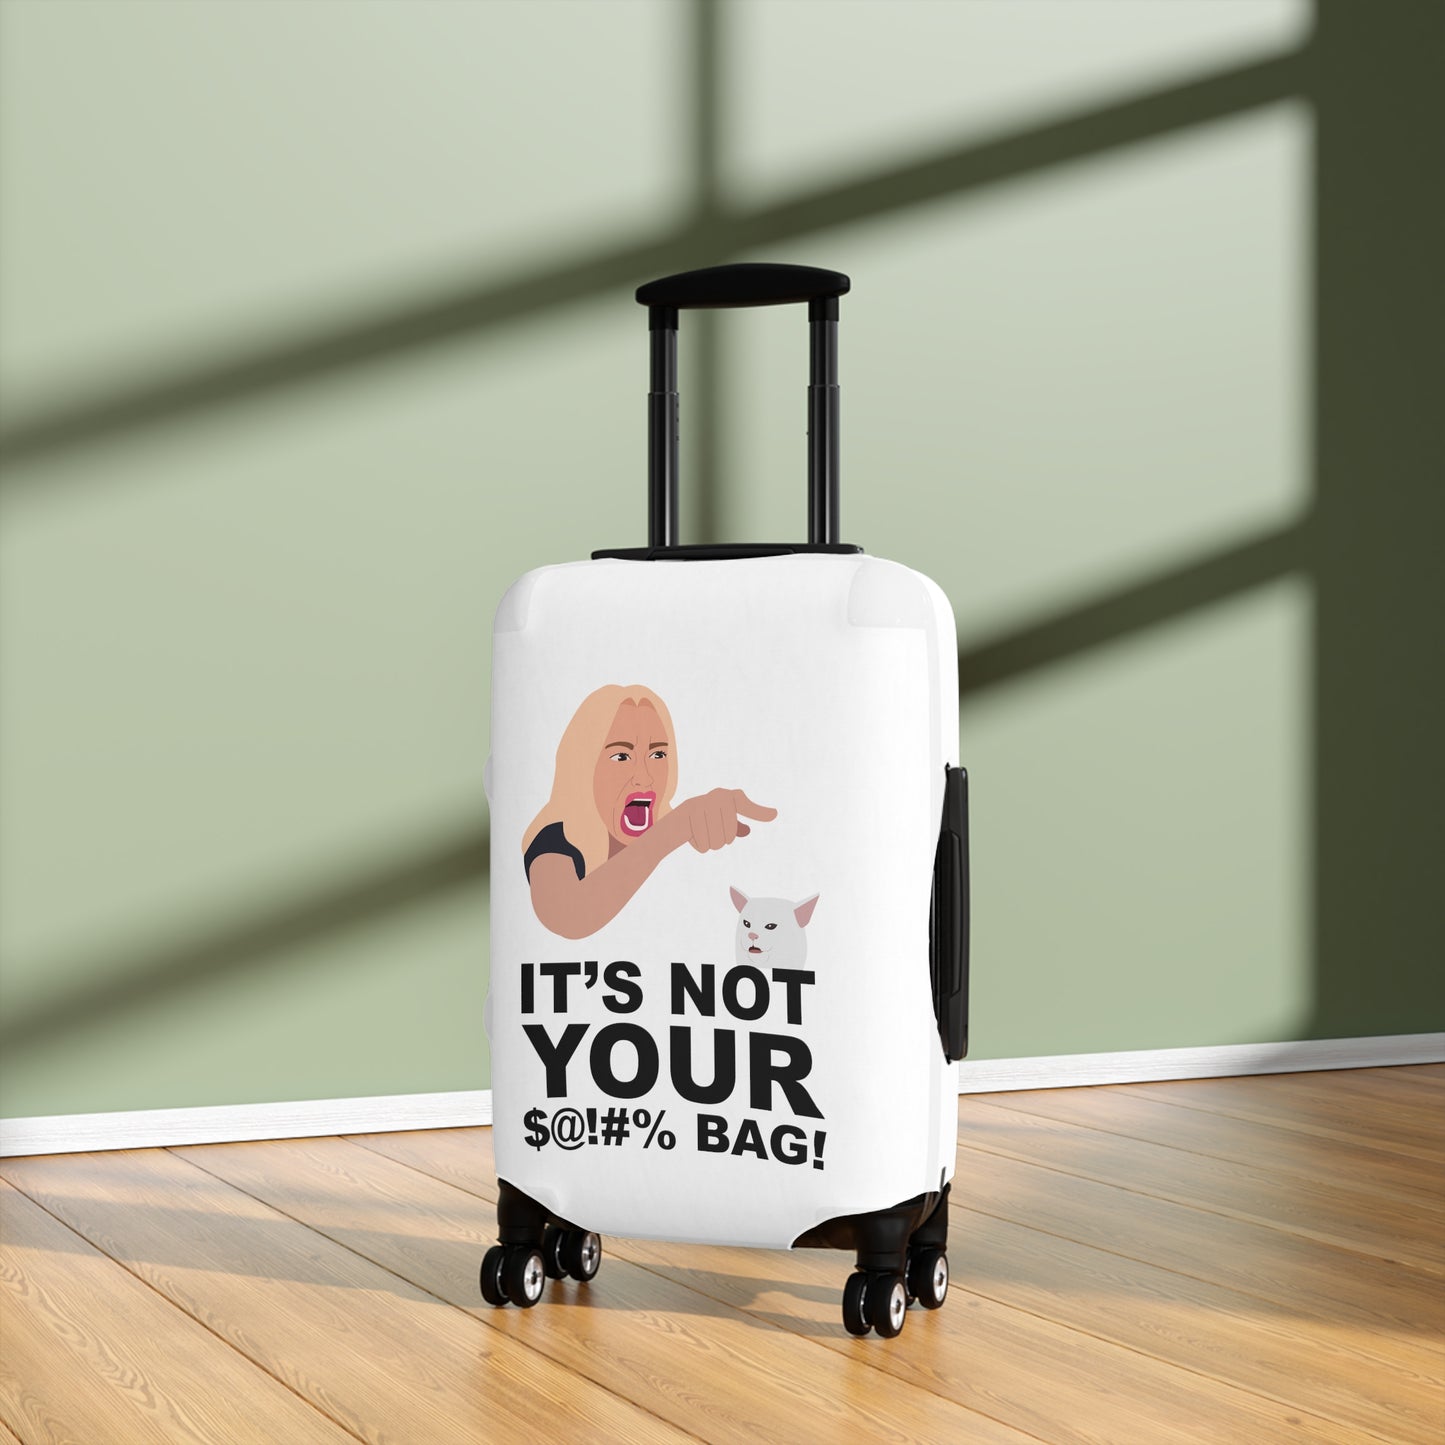 It's Not Your $@!#% BAG!--Luggage Cover